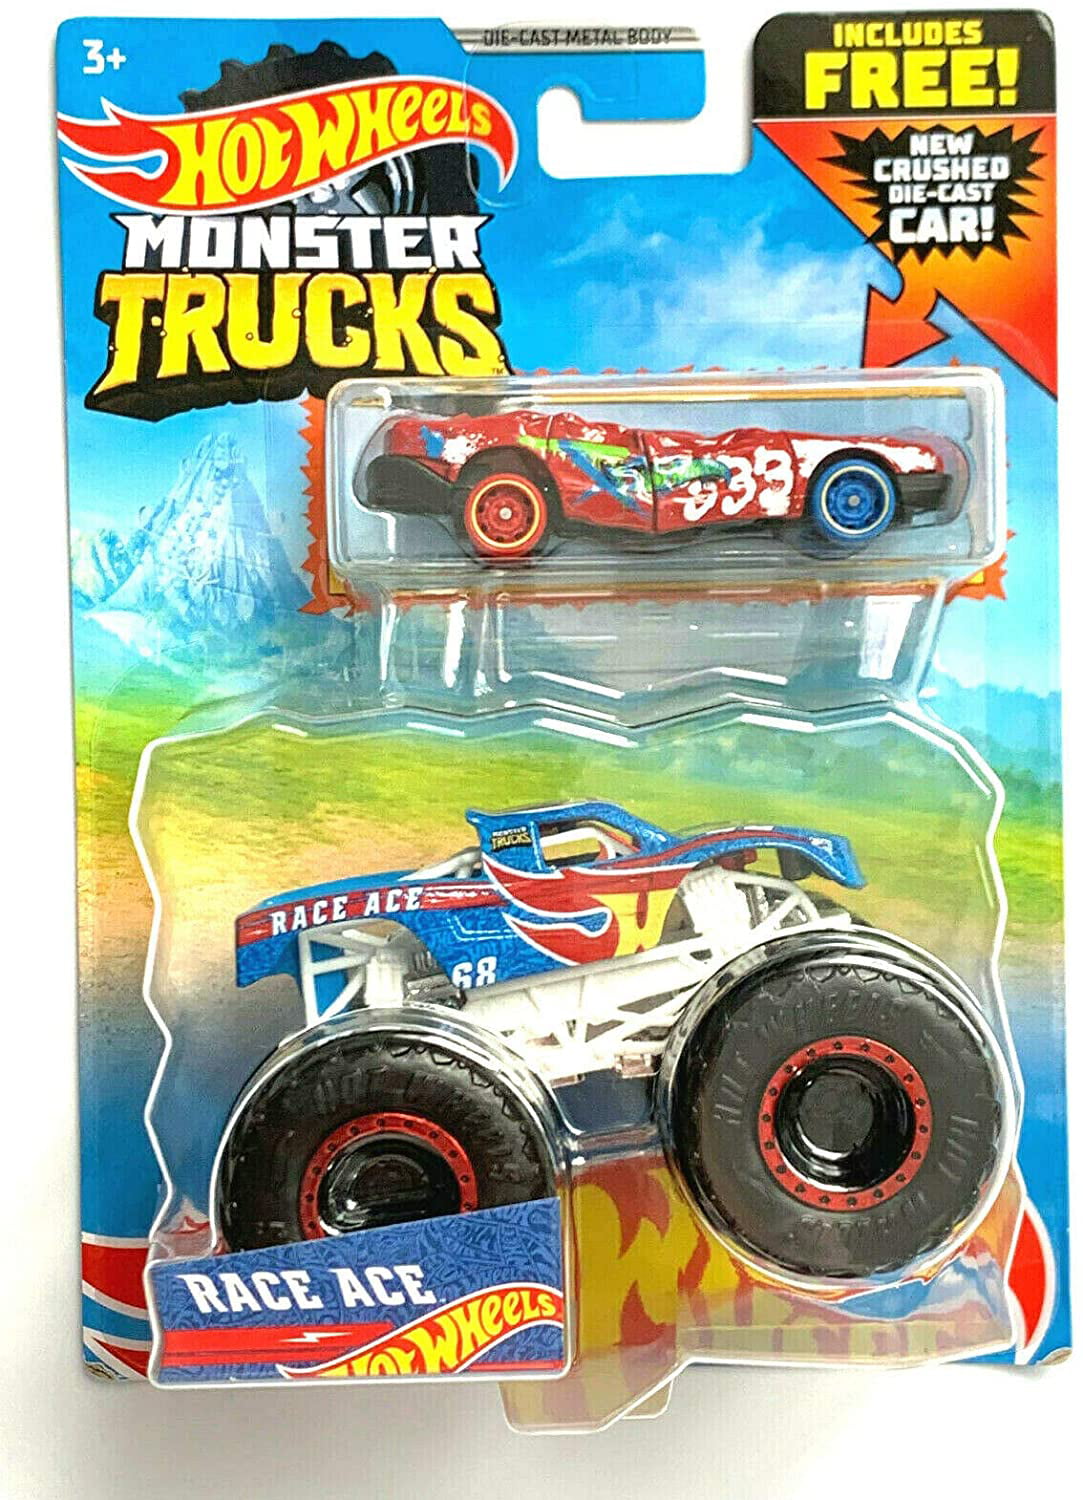 Hot Wheels Bundle of 2 Exclusive Monster Trucks (1:64 Scale) Includes:  BigFoot (with crushed die-cast car) and Bone Shaker (with re-crushable car)  For 